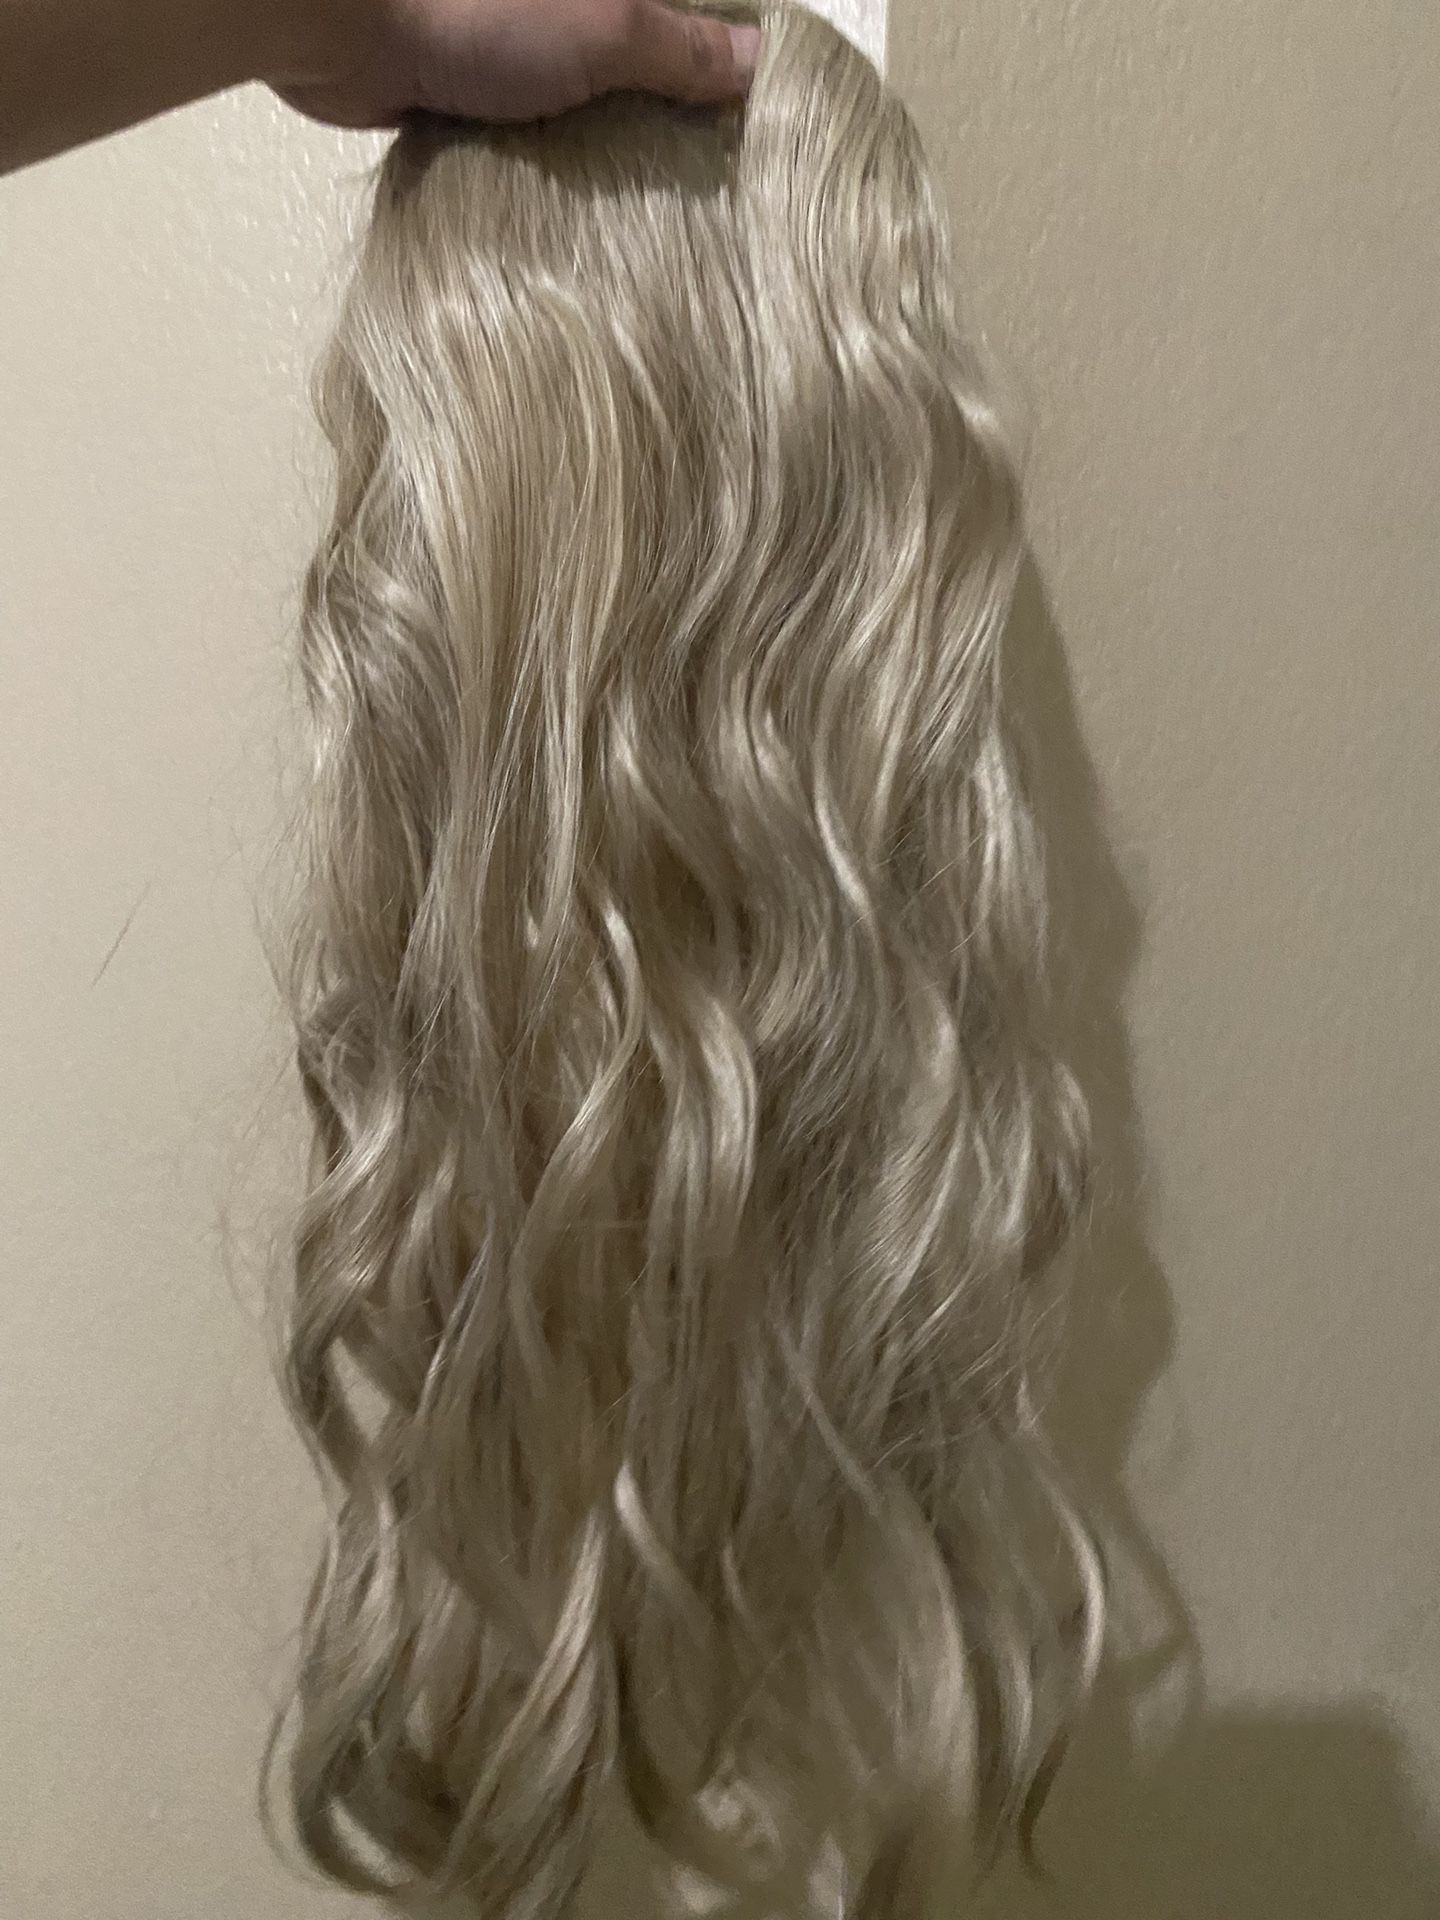 20” Inch Synthetic Ash Blonde Hair Extensions